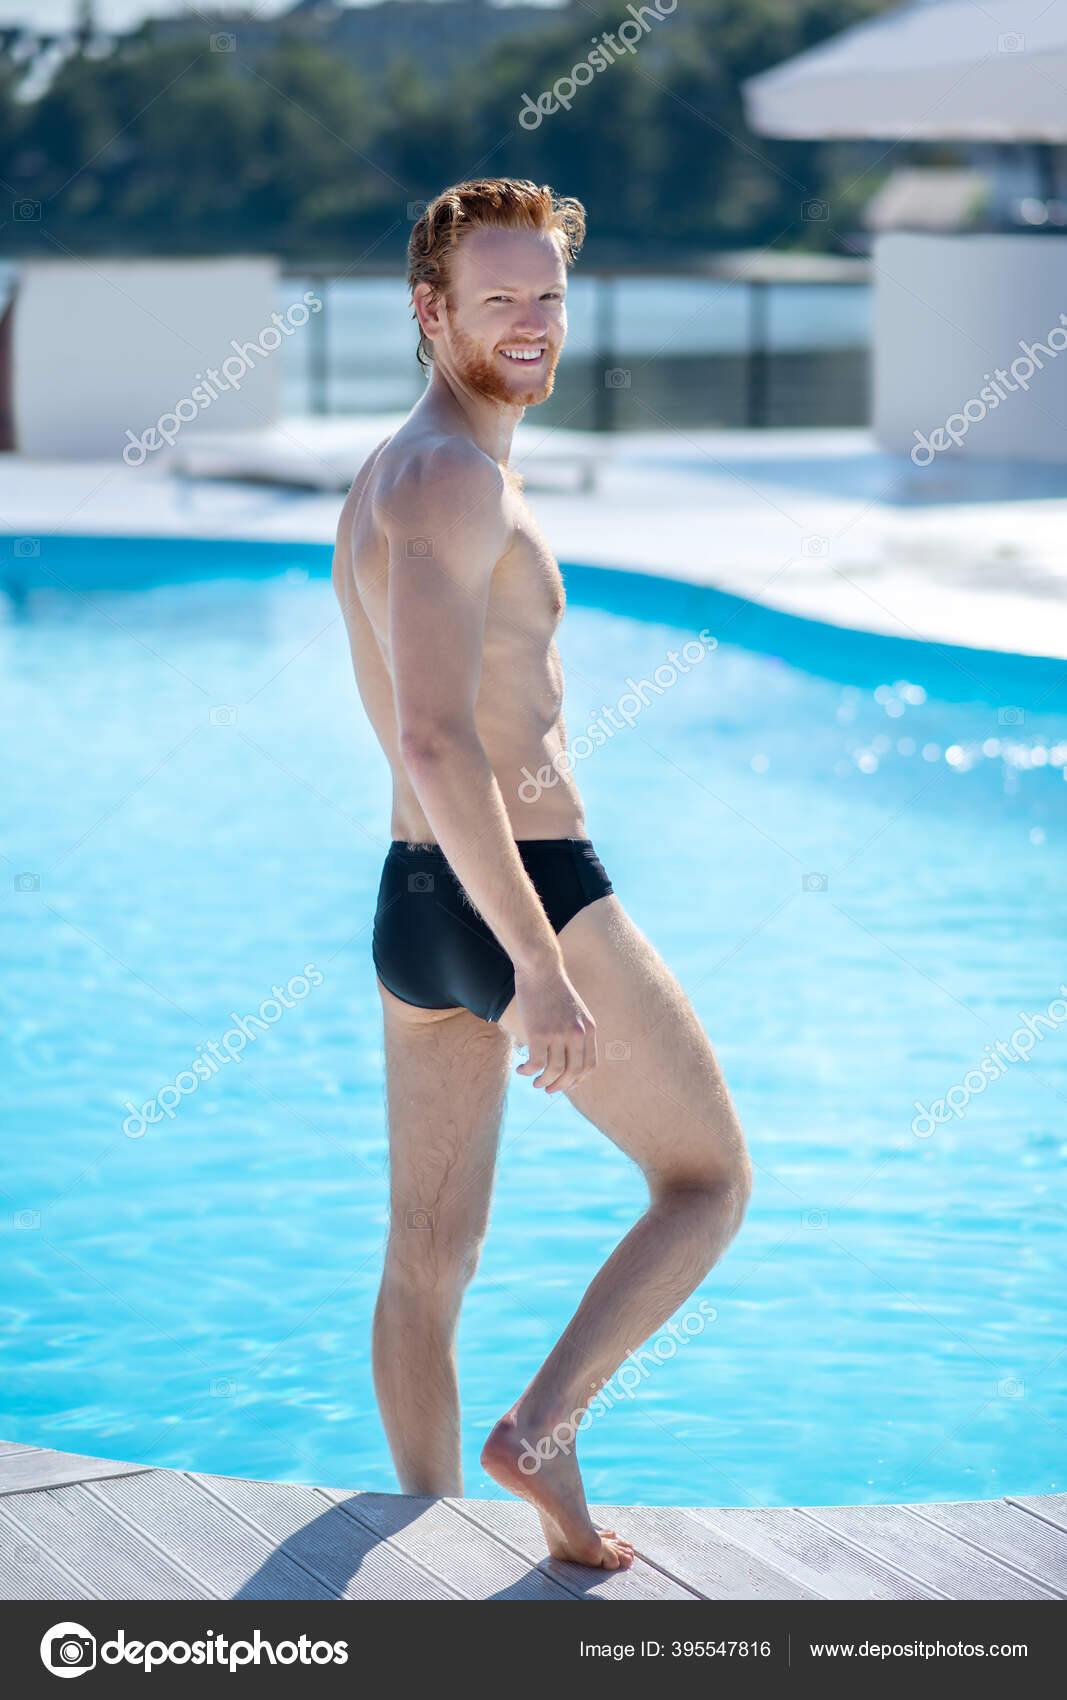 Tall athletic man turning back near the pool. Stock Photo by